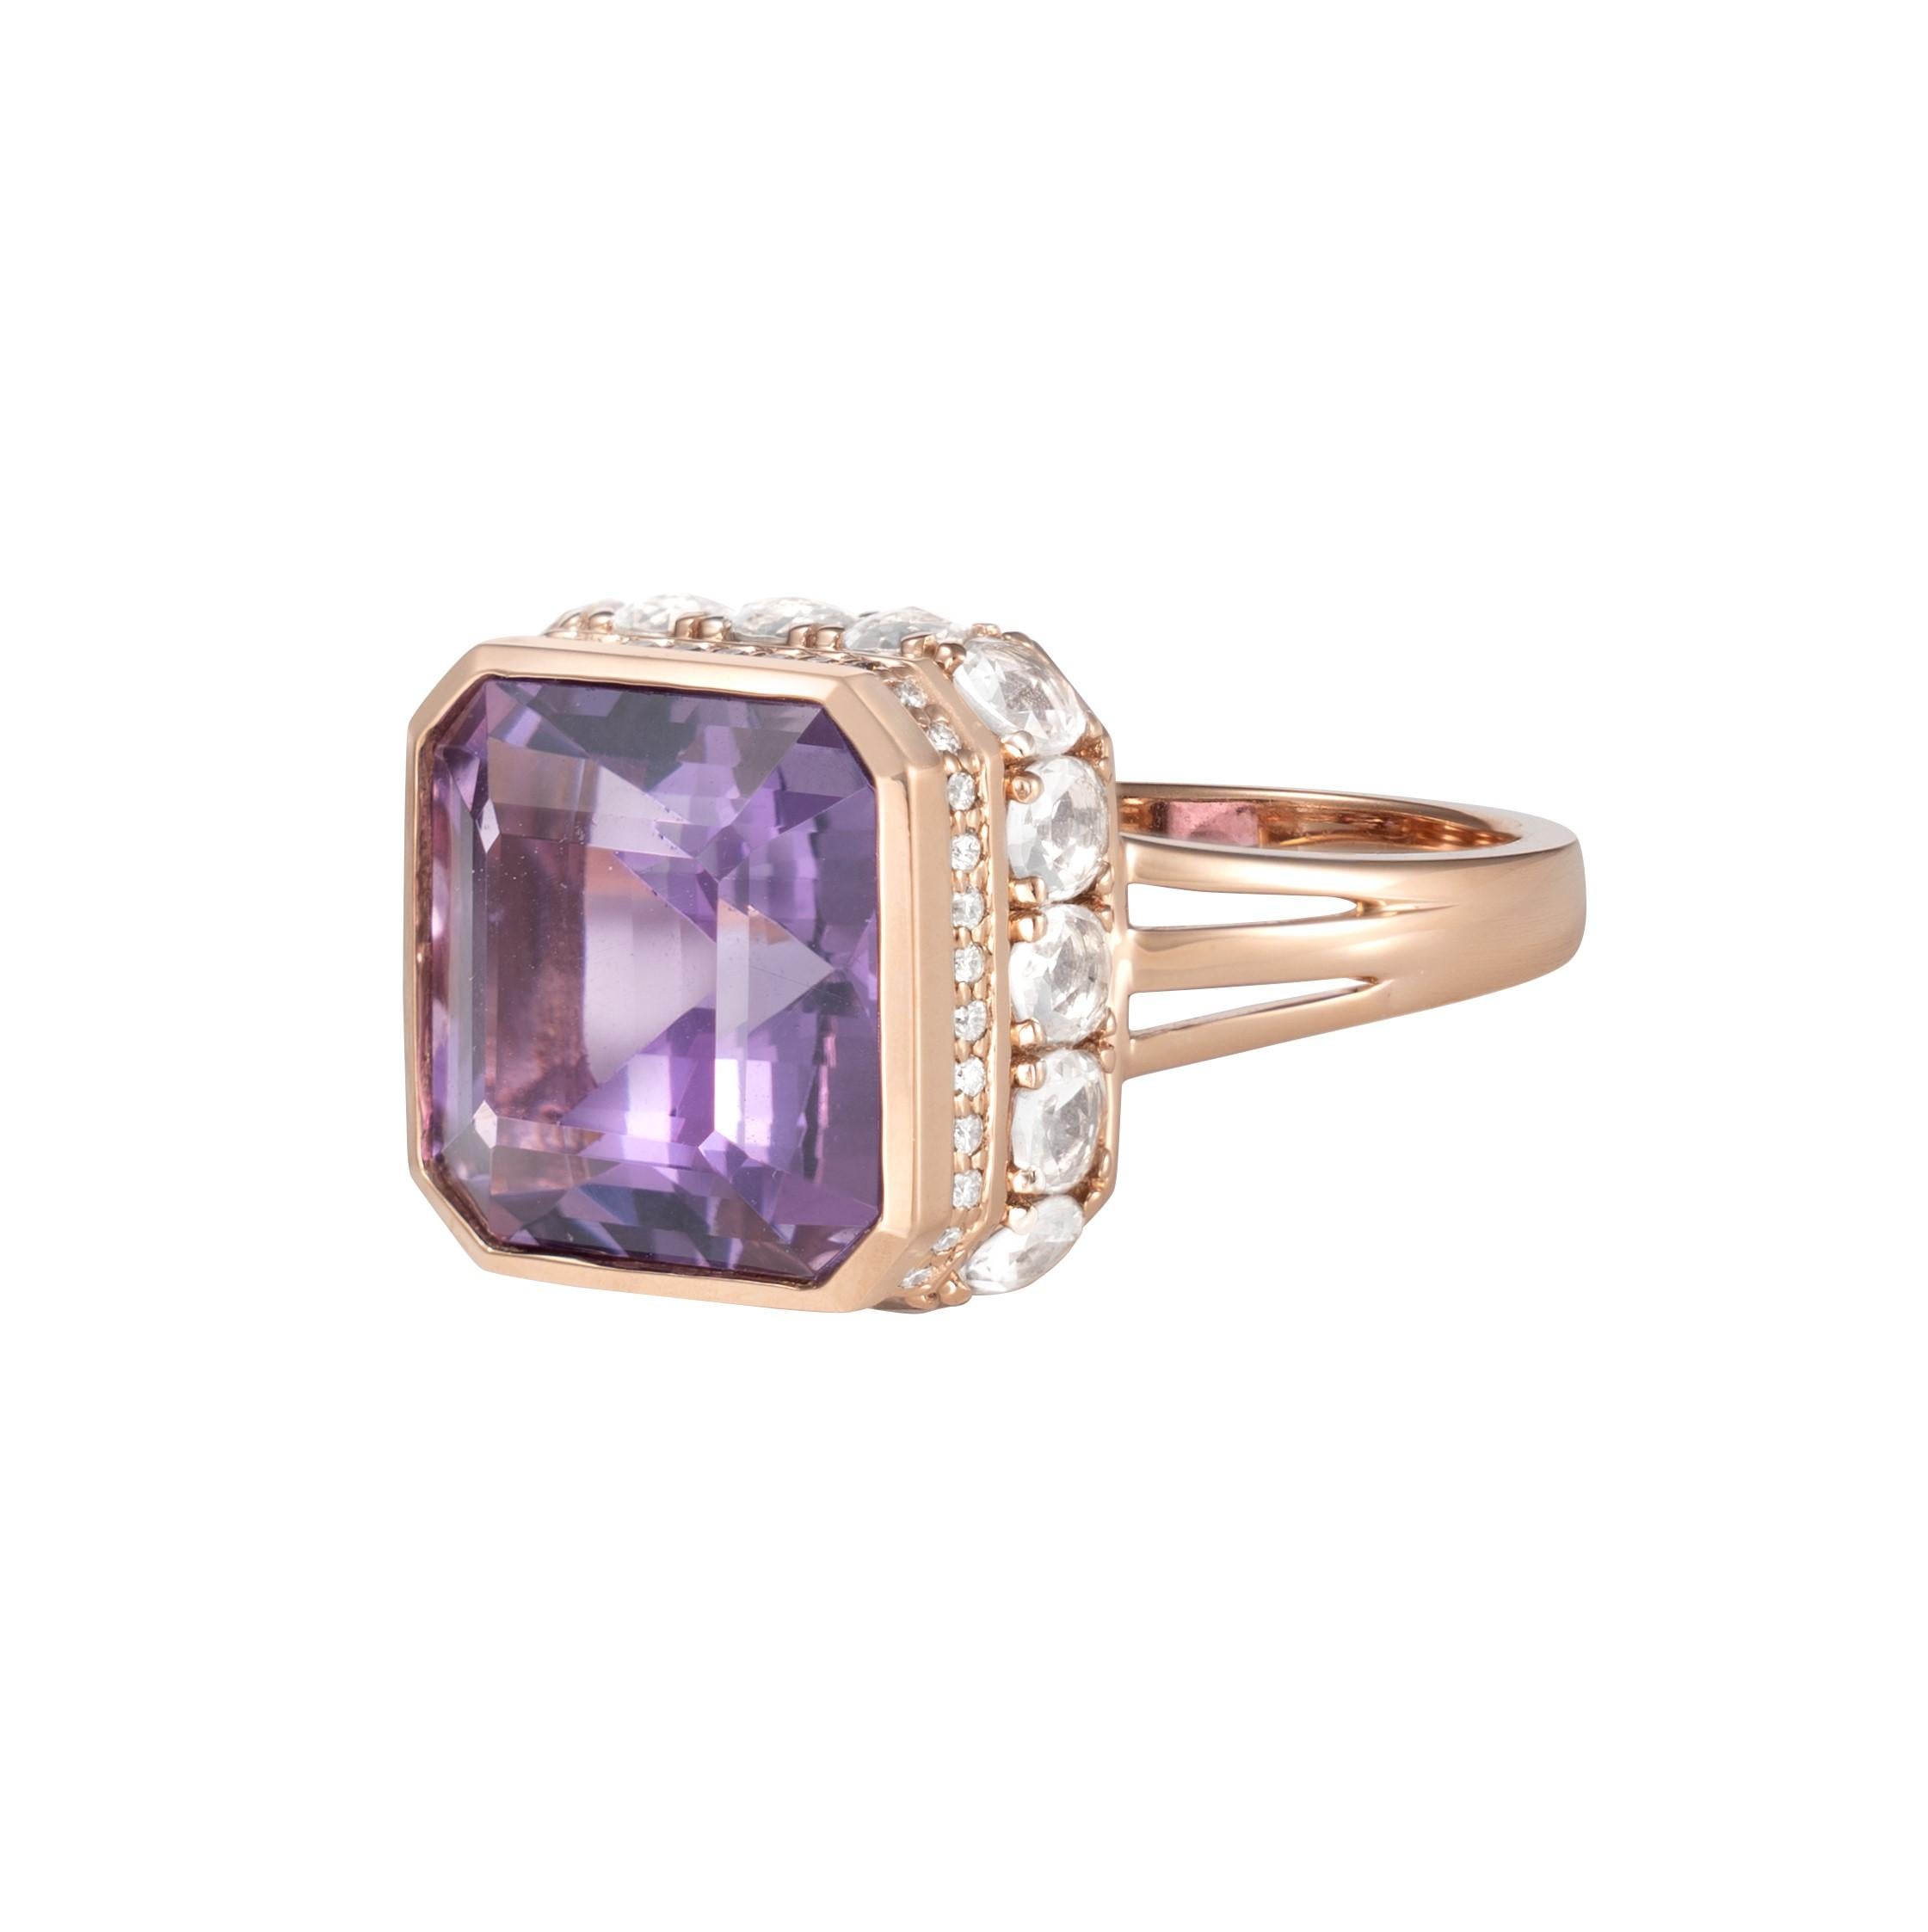 Octagon Cut Art Deco Amethyst Ring with White Topaz & Diamond in 18 Karat Rose Gold For Sale